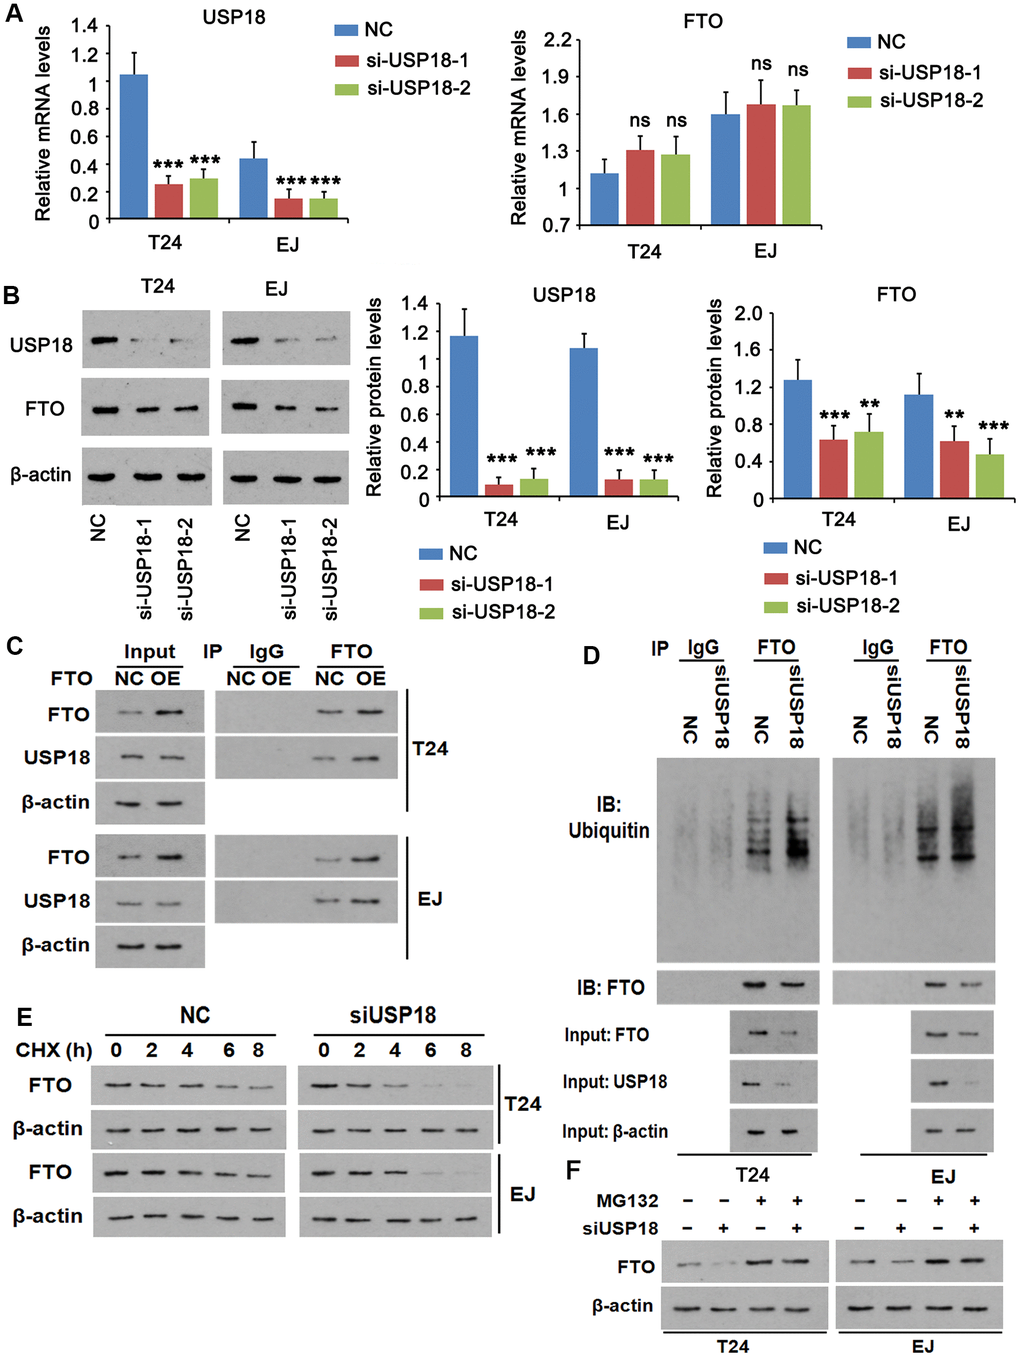 USP18 imposes post-translational deubiquitination on FTO. (A, B) Determining USP18, FTO mRNA (A) and protein (B) expression upon USP18 depletion. USP18 was knocked down by transfecting USP18 siRNA-248 (si-USP-1) and USP18 siRNA-581 (si-USP-2). NC, negative control transfected with scramble shRNA. *** p t-test. n.s., non-significant. (C) Co-immunoprecipitation determining the direct interaction between FTO and USP18. NC, negative control; OE, overexpression. (D) Co-immunoprecipitation of FTO protein and ubiquitin in the presence or absence of USP18. USP18 was knocked down by transfecting USP18 siRNA-248. (E) Western blot determining FTO protein stability in the presence or absence of USP18. USP18 was knocked down by transfecting USP18 siRNA-248. (F) Western blot showing that blockage of proteasomal degradation with MG132 stabilized FTO protein upon depletion of USP18. USP18 was knocked down by transfecting USP18 siRNA-248.